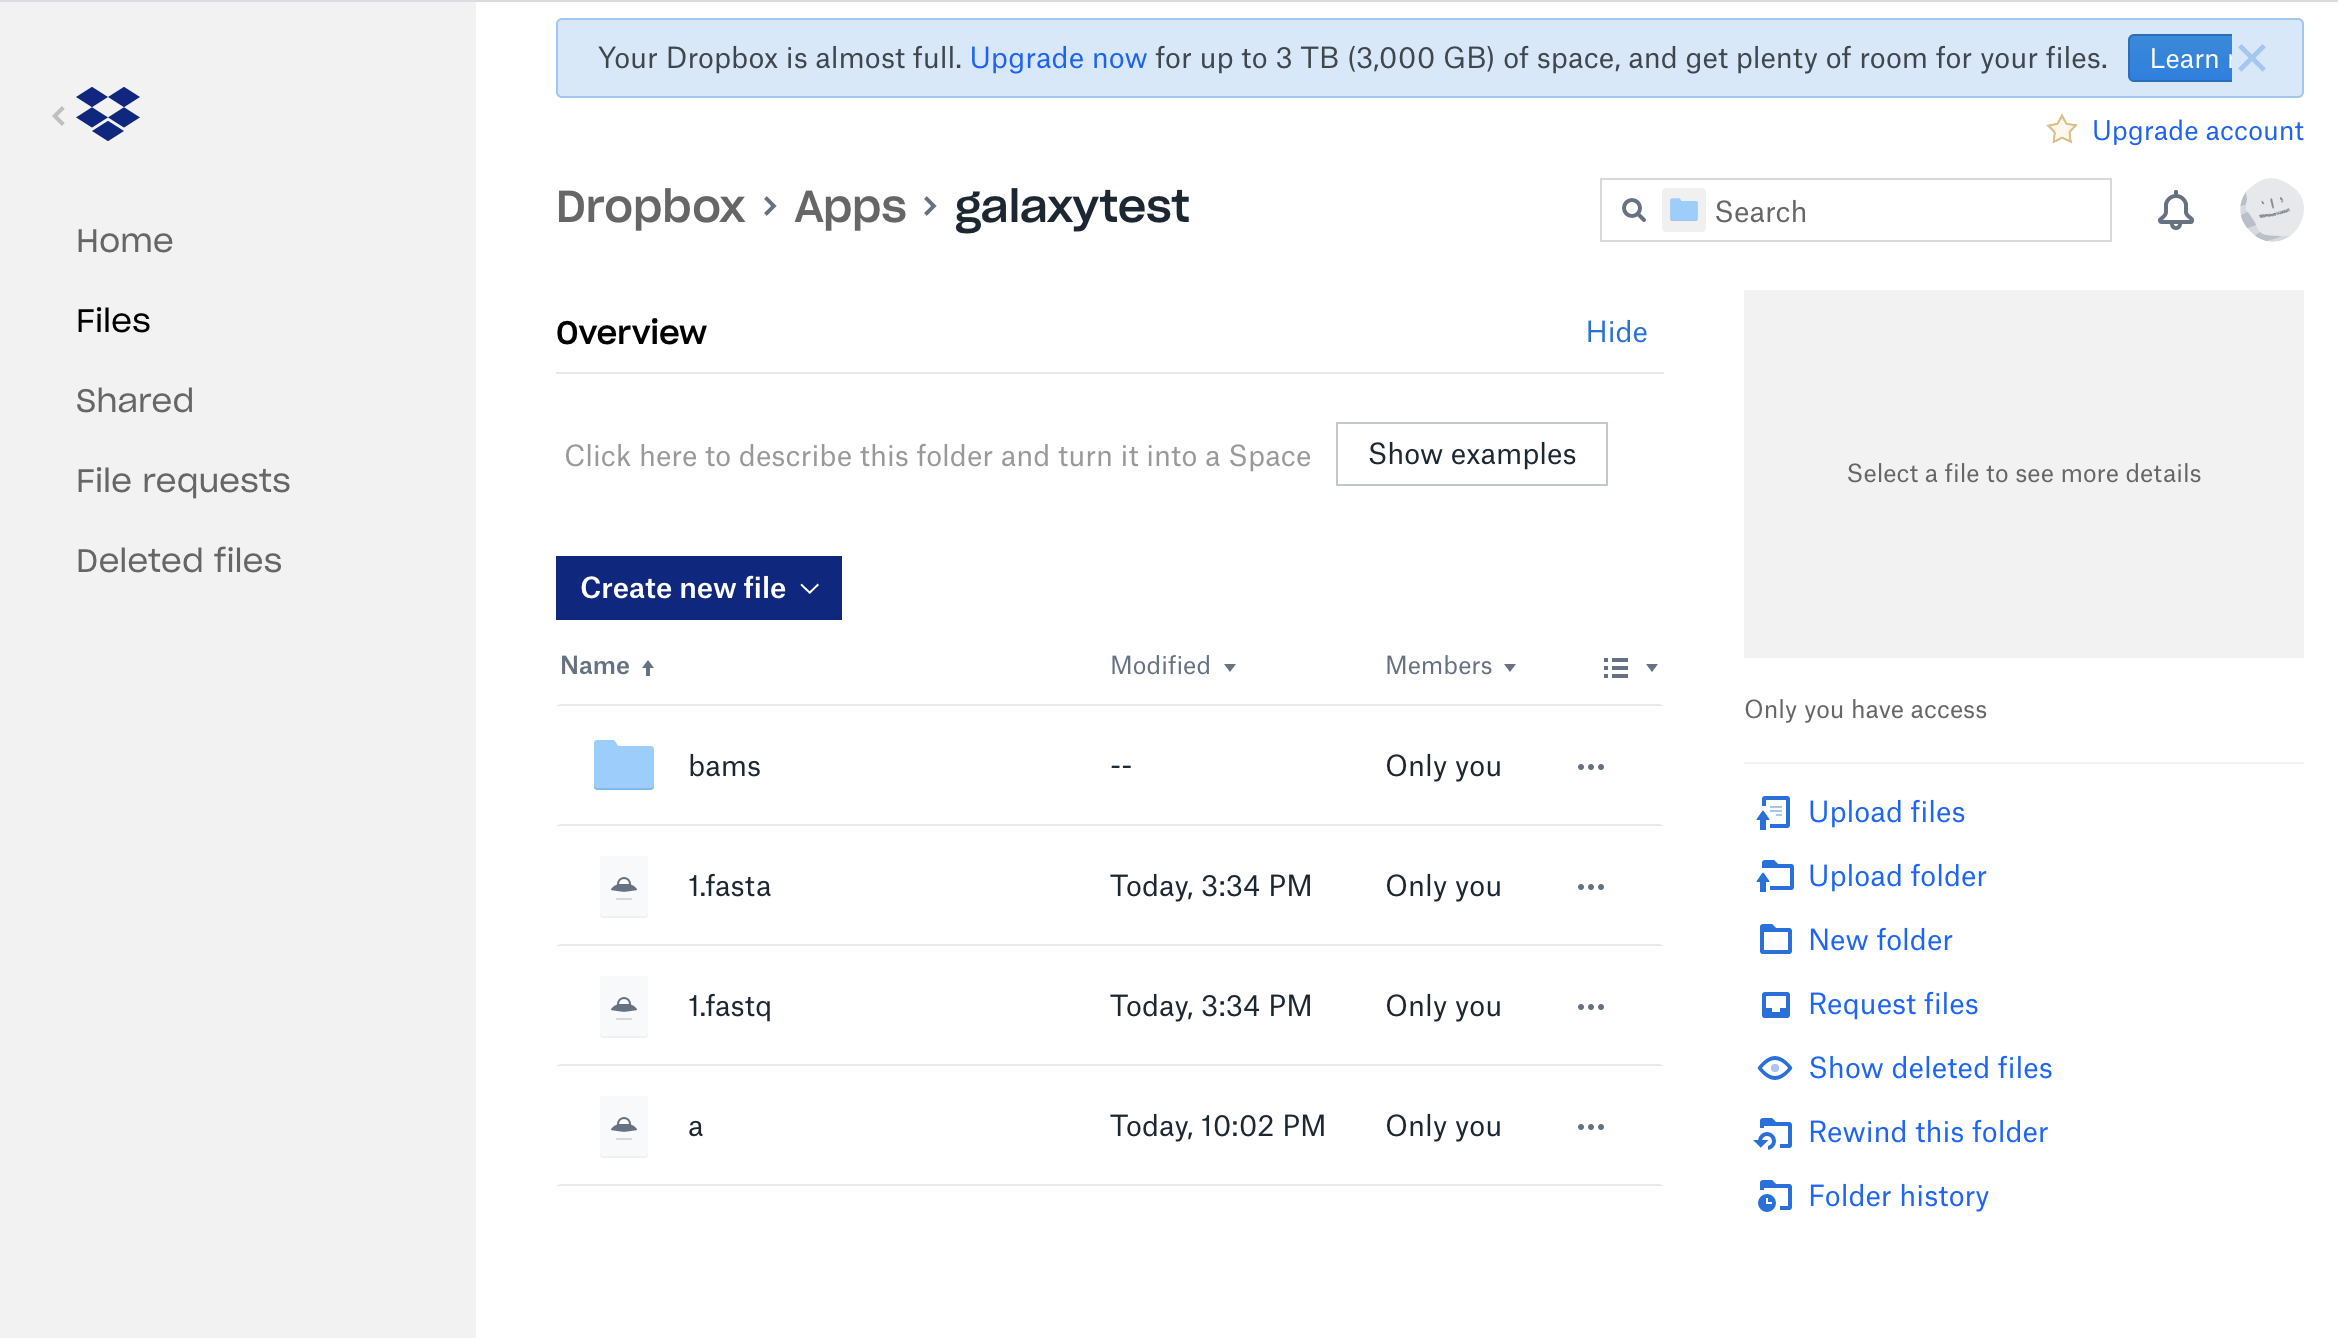 Screenshot of Dropbox with a "bams" folder and several test files